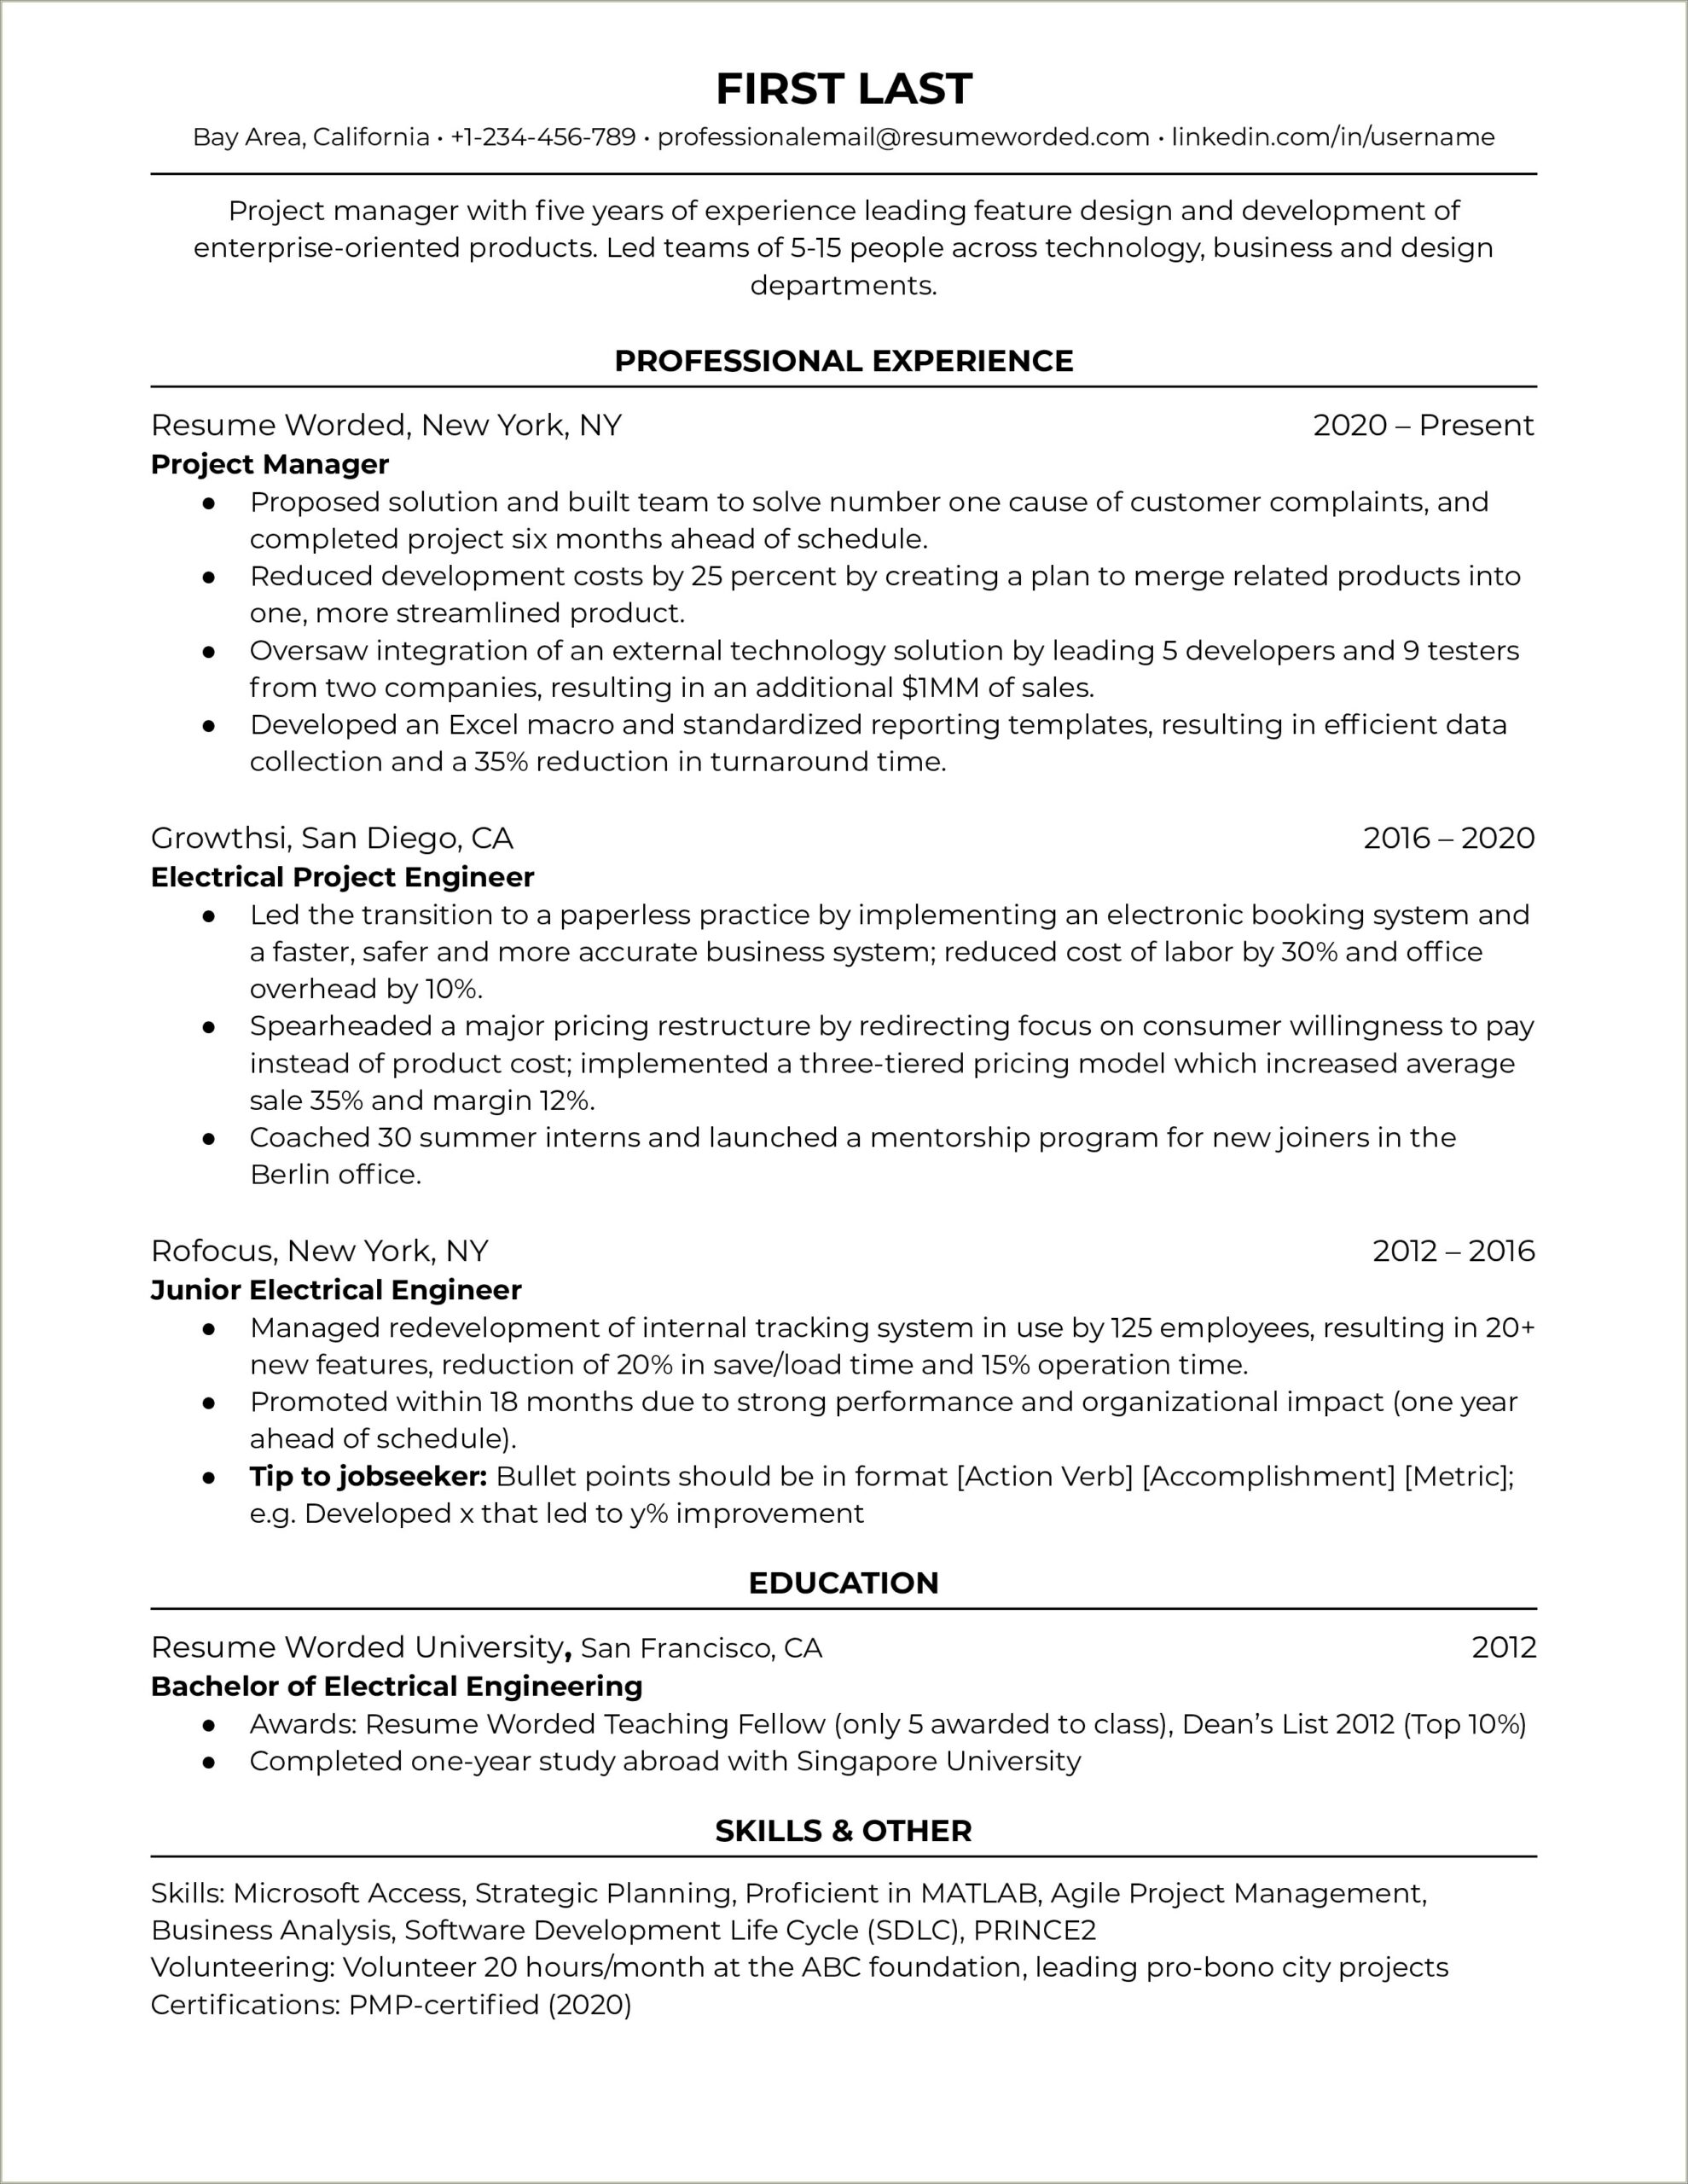 Good Bullet Point Qualifcations For Resume